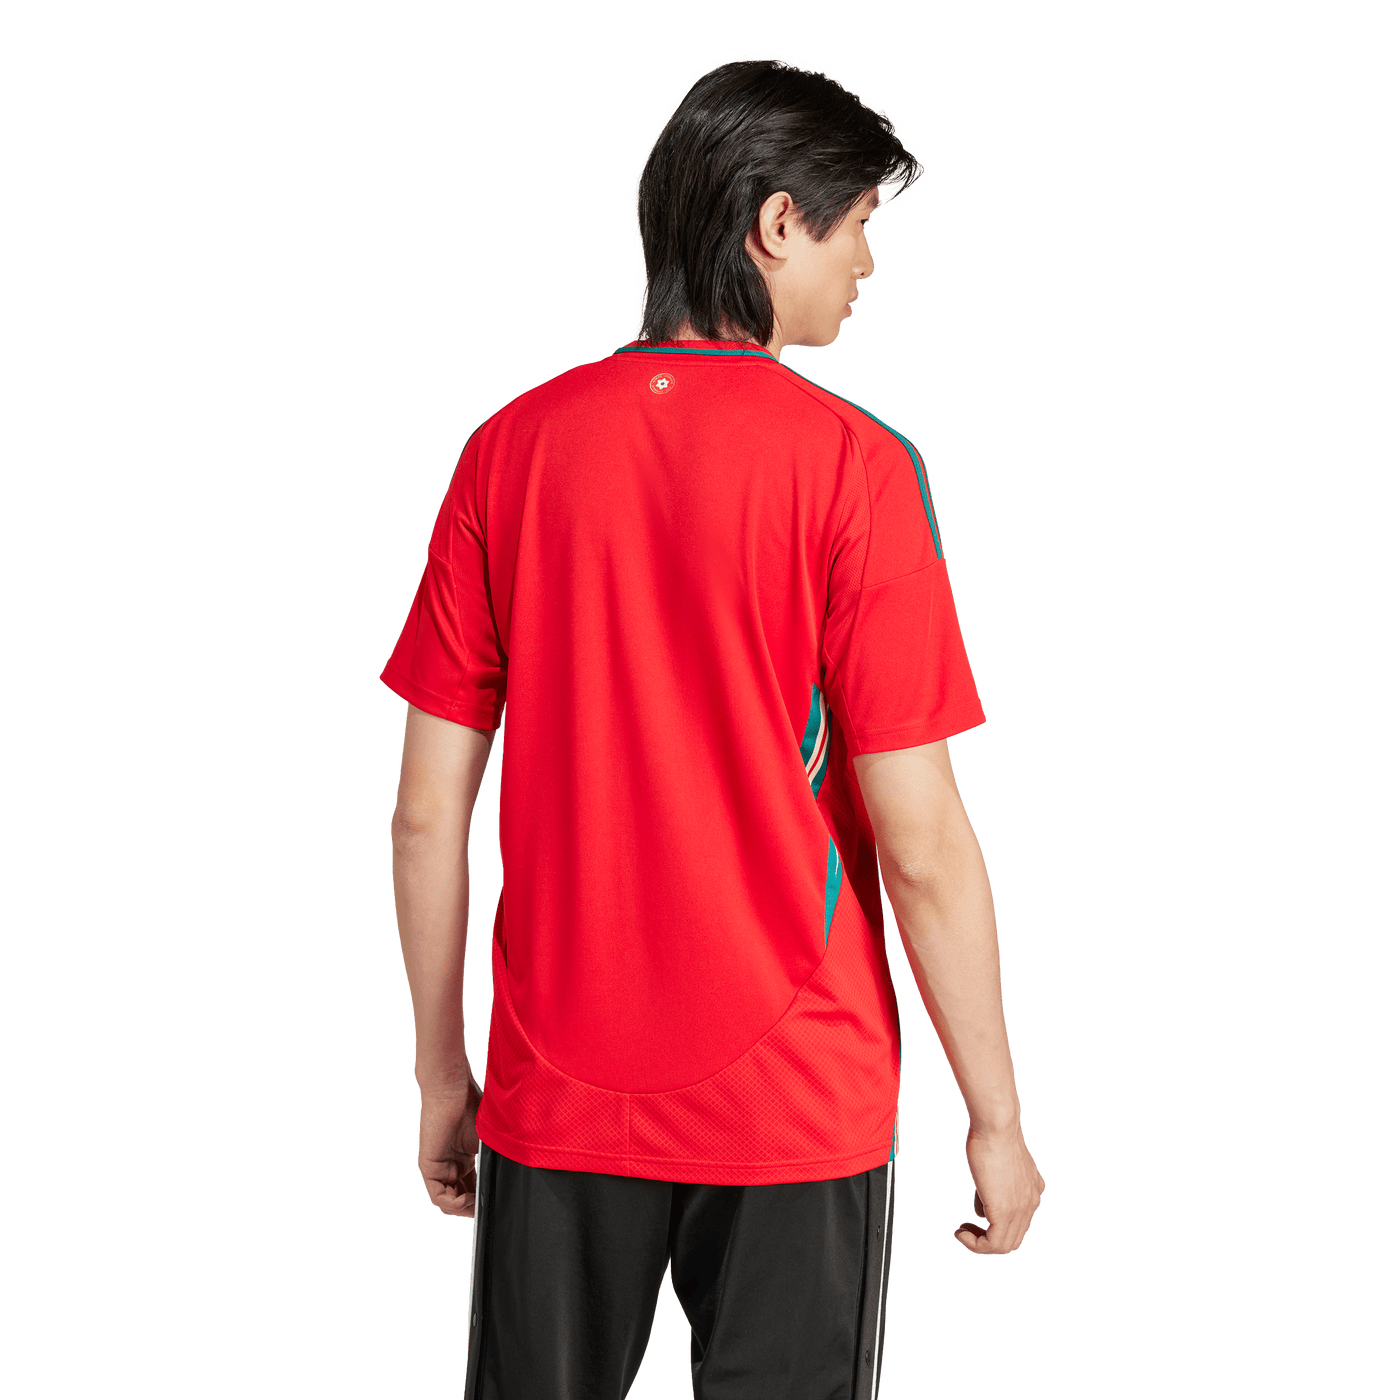 Wales National Adults Home Jersey 2024